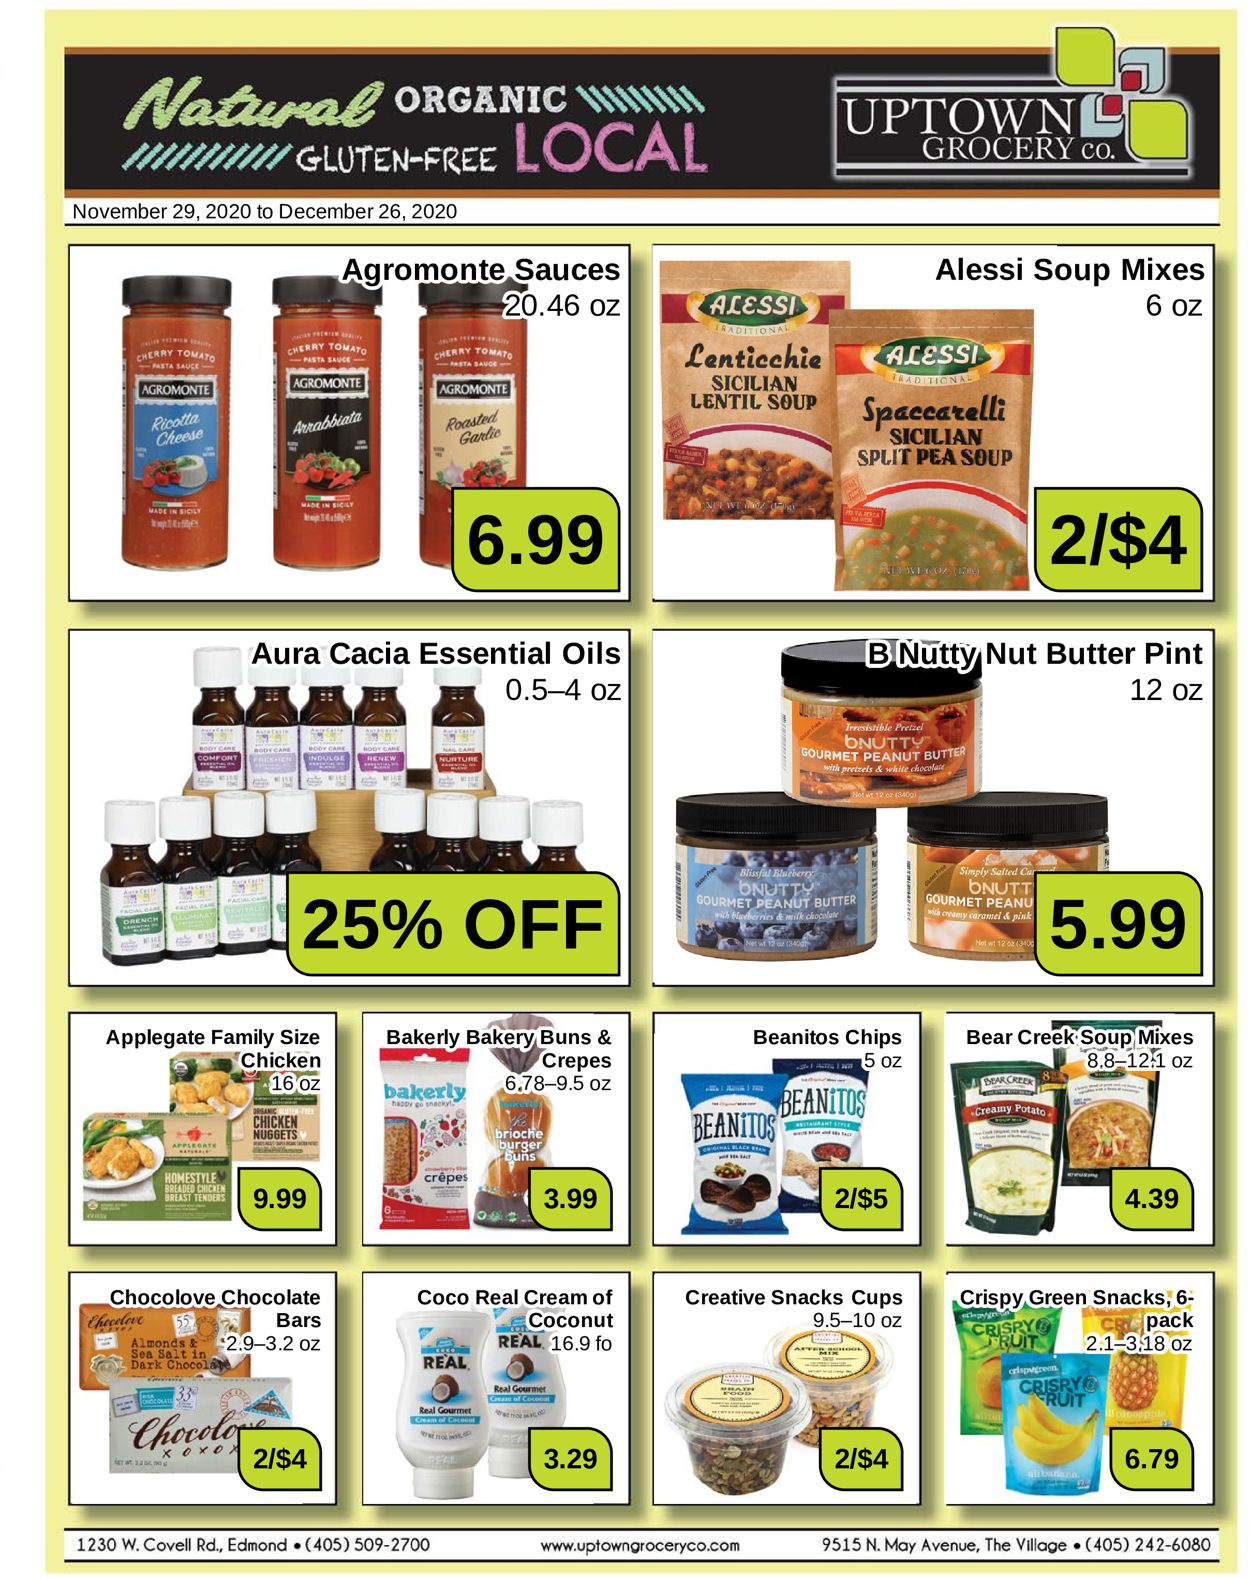 Uptown Grocery Co. Specialty & Gourmet Weekly Ad Circular - valid 11/29-12/26/2020